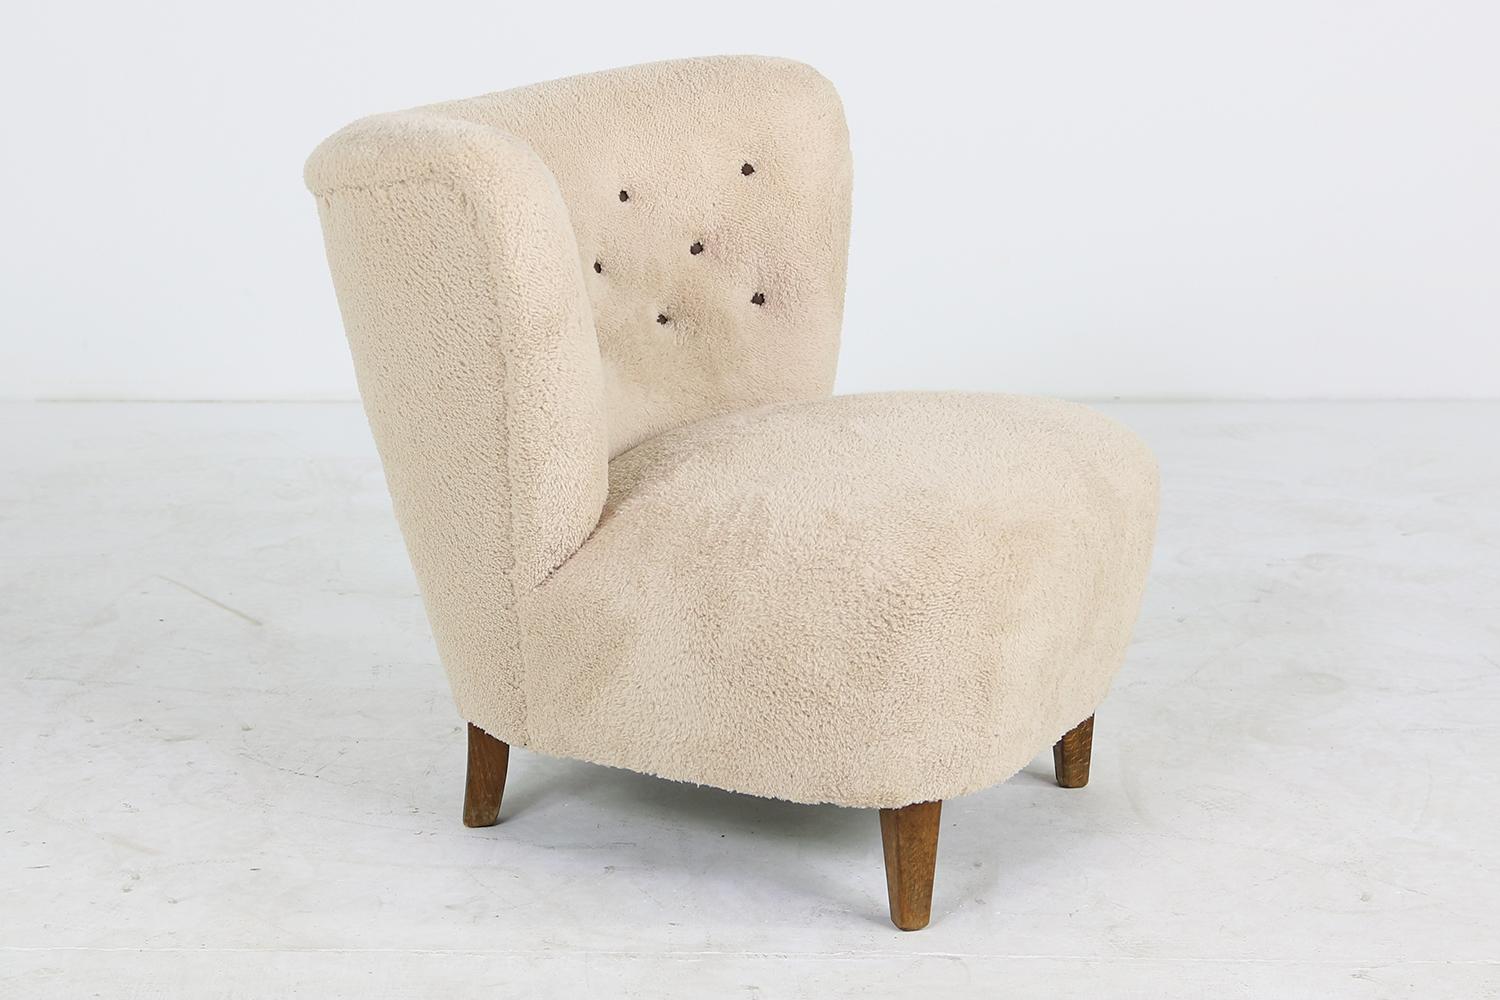 Beautiful 1950s lounge chair by Gösta Jonsson, Jönköping Sweden, very rare piece, stained beechwood legs, new upholstery and covered with a teddy faux fur fabric, super soft cotton fur, with beautiful dark brown leather buttons, restored. This rare